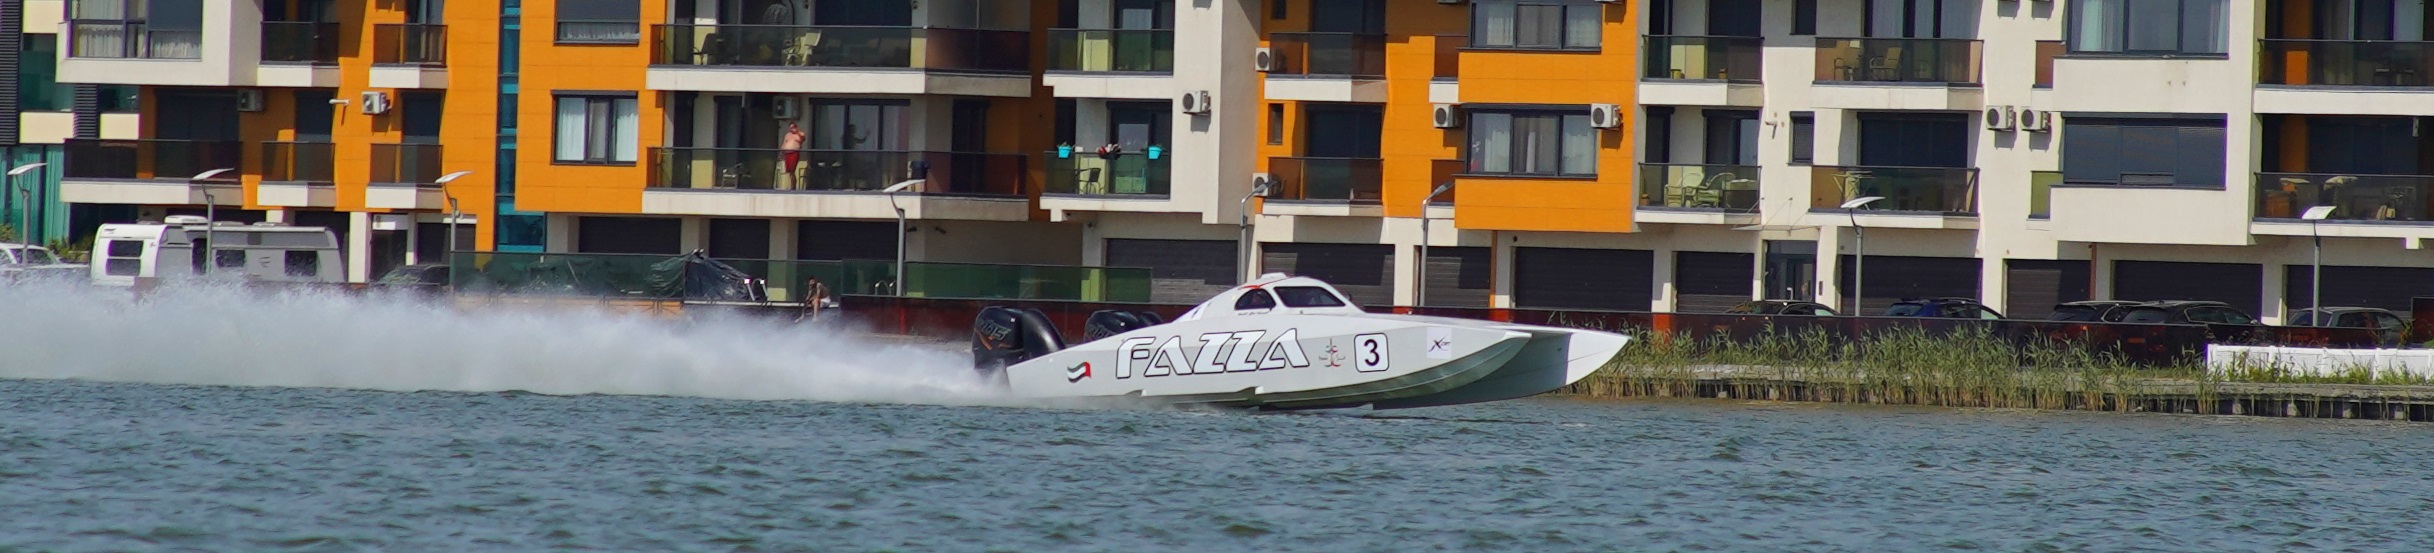 The Fazza 3 boat won the first race in Constance